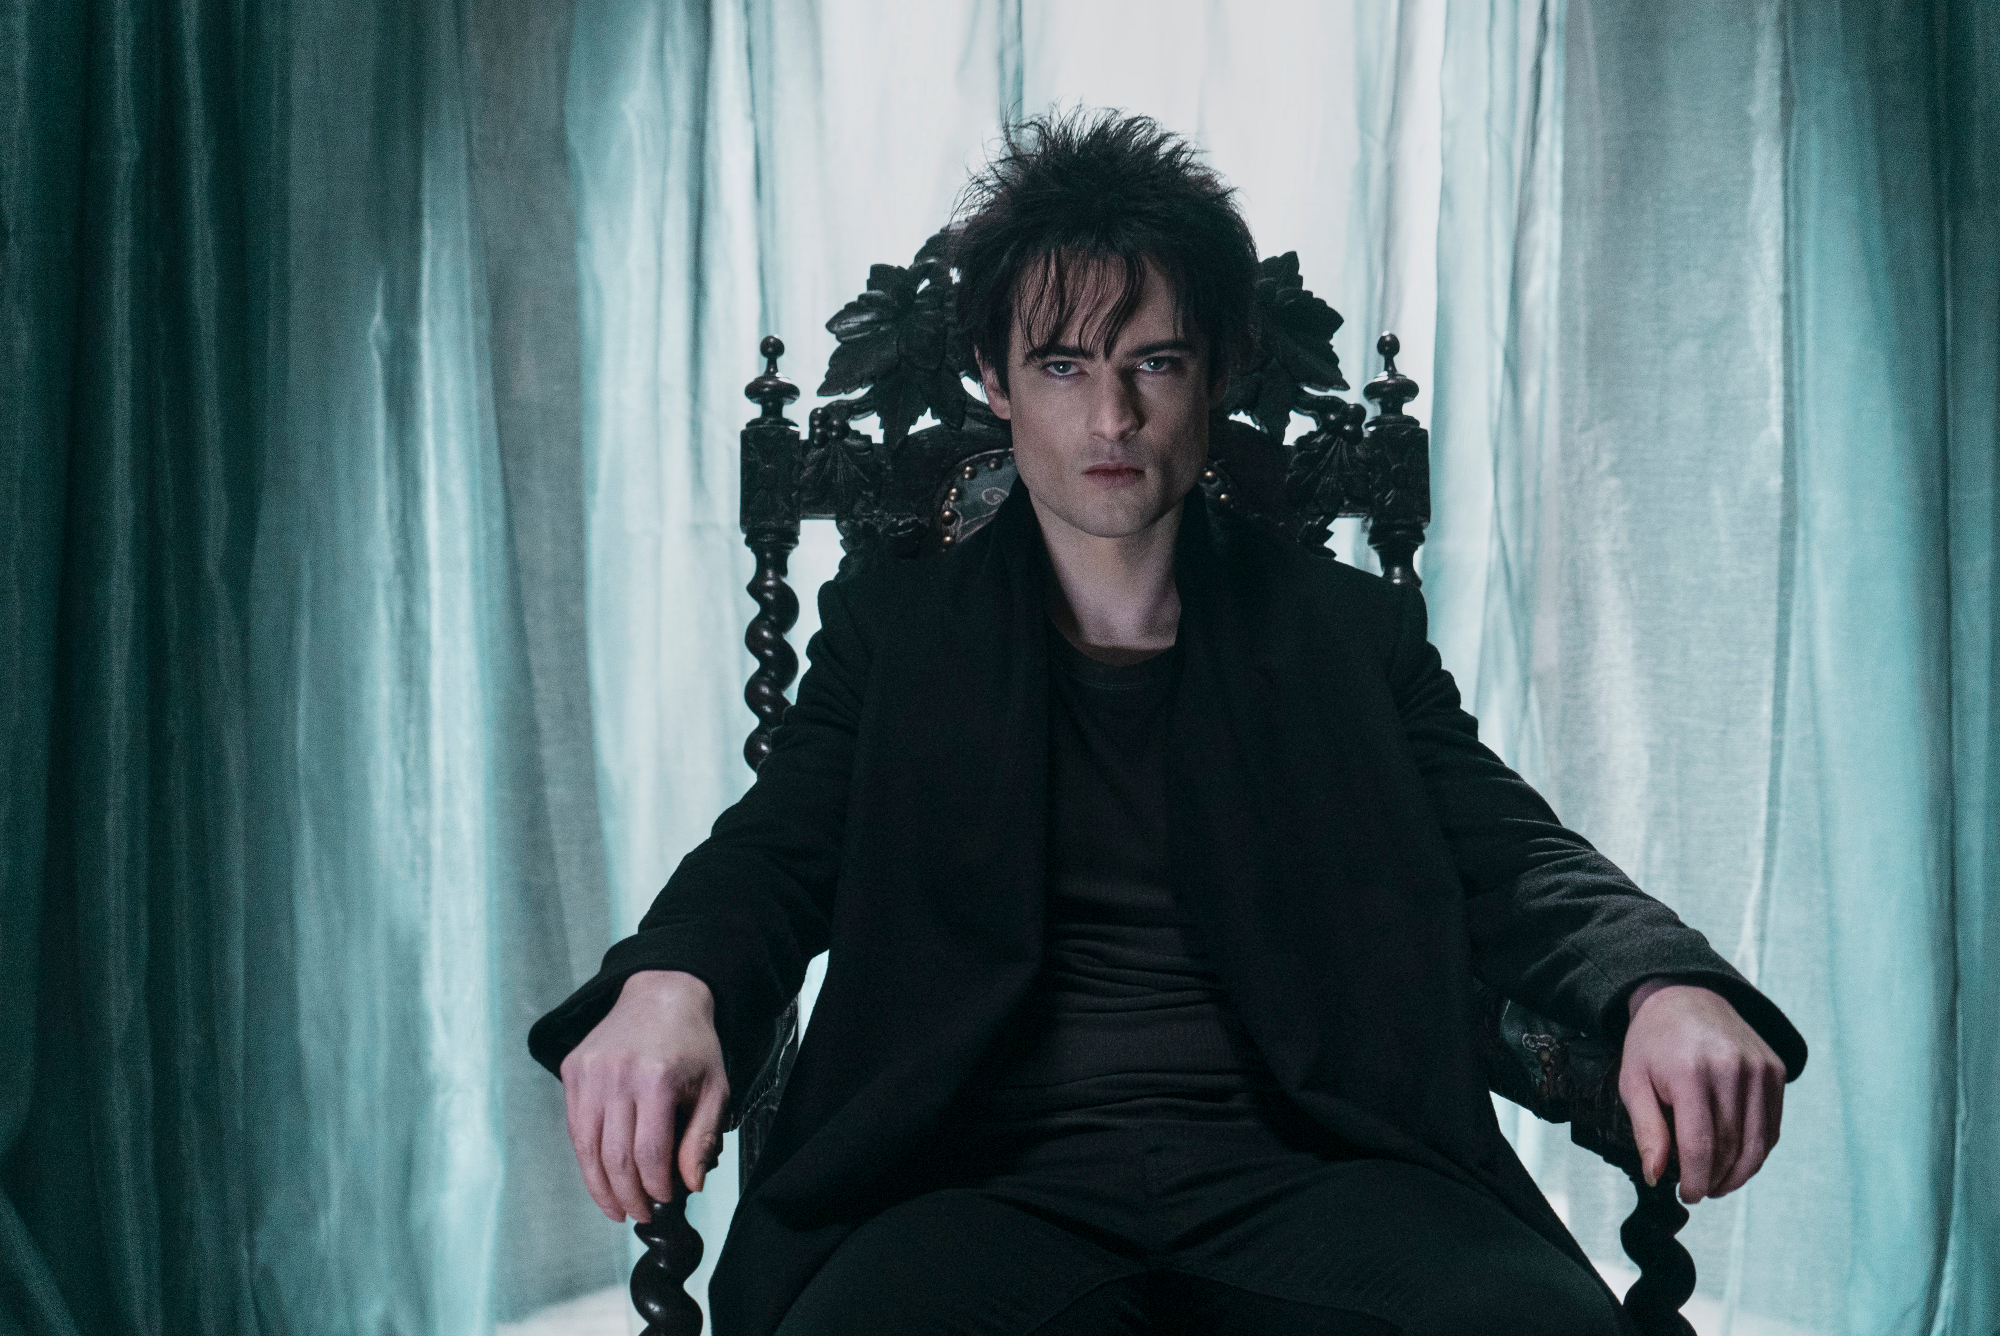 Tom Sturridge as Dream in the cast of Netflix's 'The Sandman.' He's sitting in a chair with light blue curtains behind him.